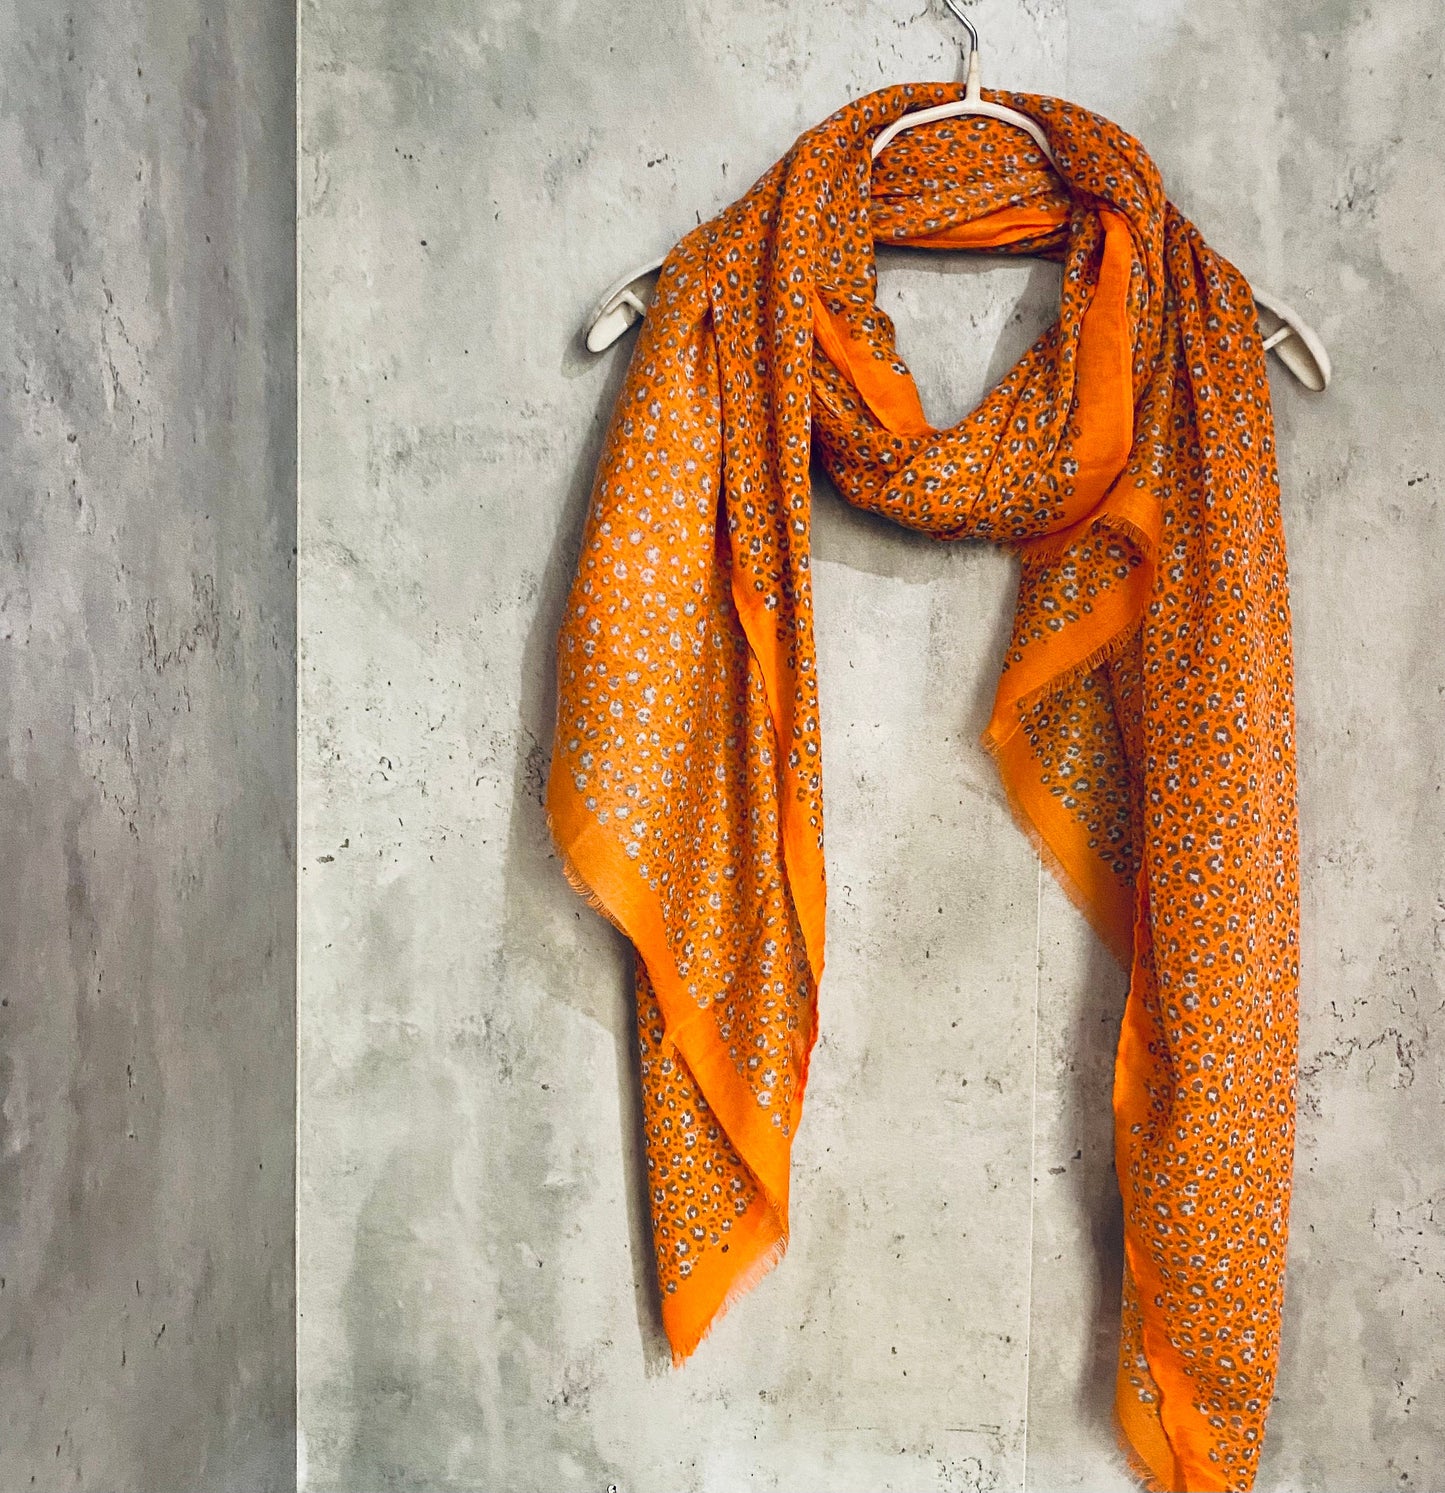 Small leopard Pattern Orange Cotton Scarf/Spring Summer Autumn Scarf/UK Seller/Scarf Women/Gifts For Mom/Gifts For Her Birthday/Christmas